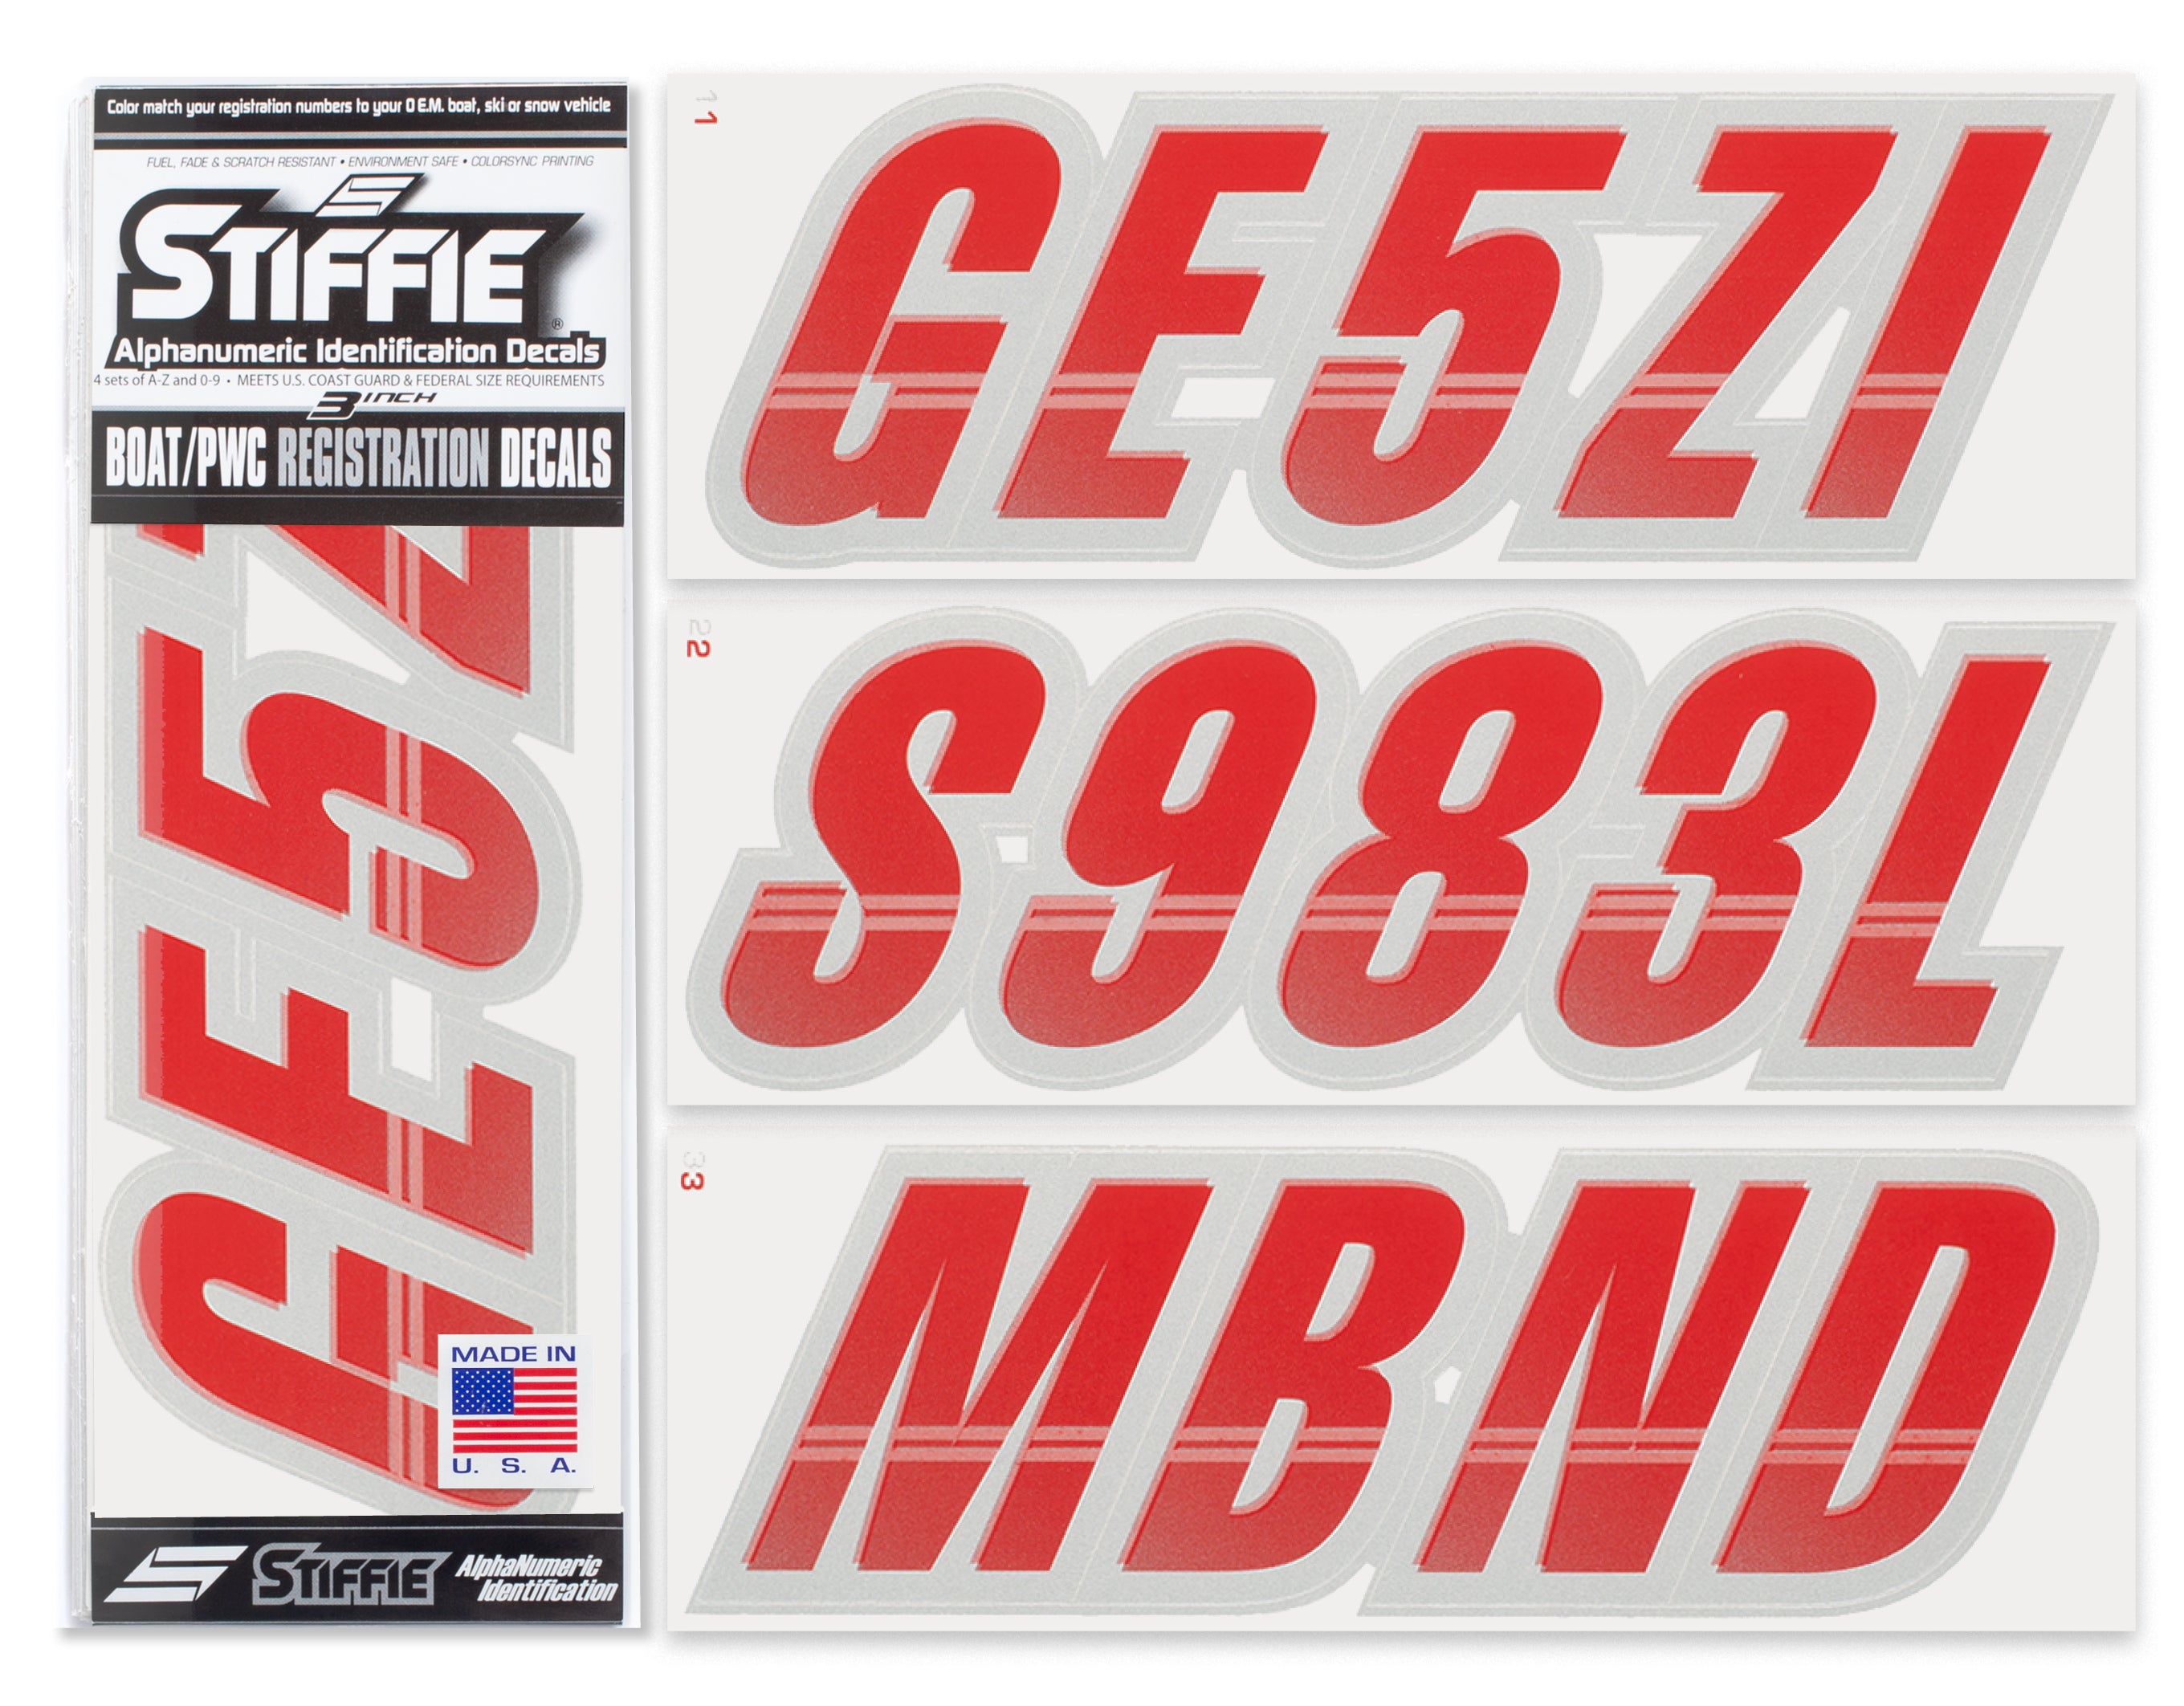 Stiffie Techtron Red/Silver 3" Alpha-Numeric Registration Identification Numbers Stickers Decals for Boats & Personal Watercraft